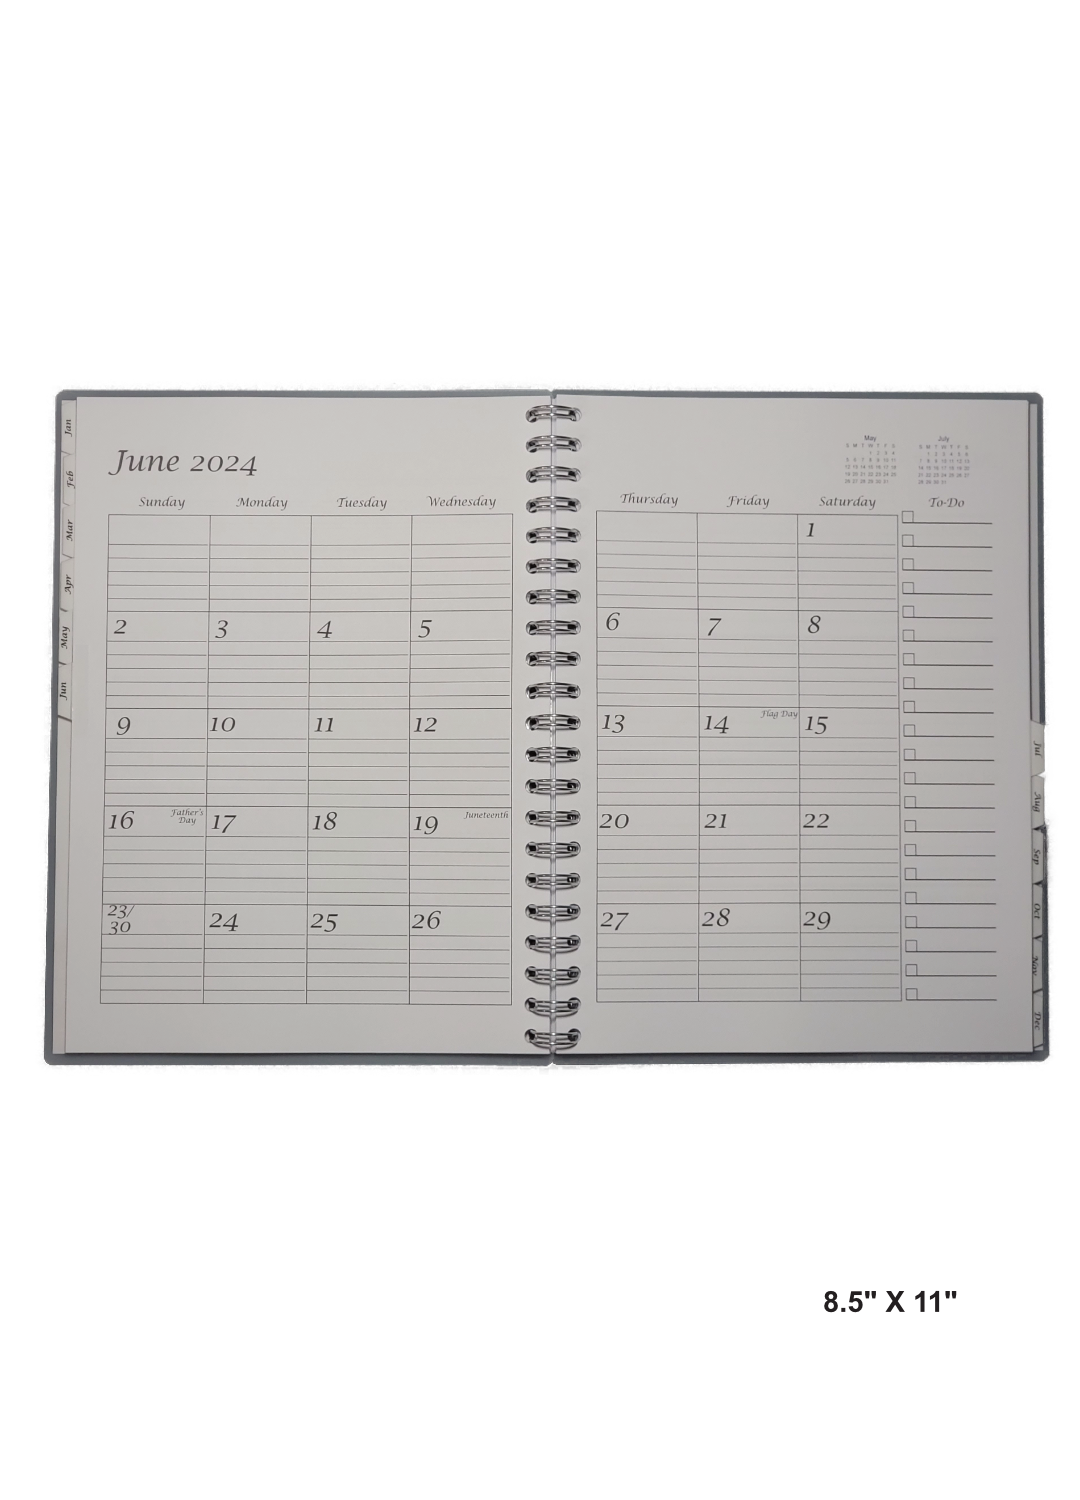 Inside view of a 8.5" x 11" hand-made 12-month planner with a clean and organized layout. Each month has dedicated pages with ample writing space and clear headings. A practical and visually appealing tool for staying organized.